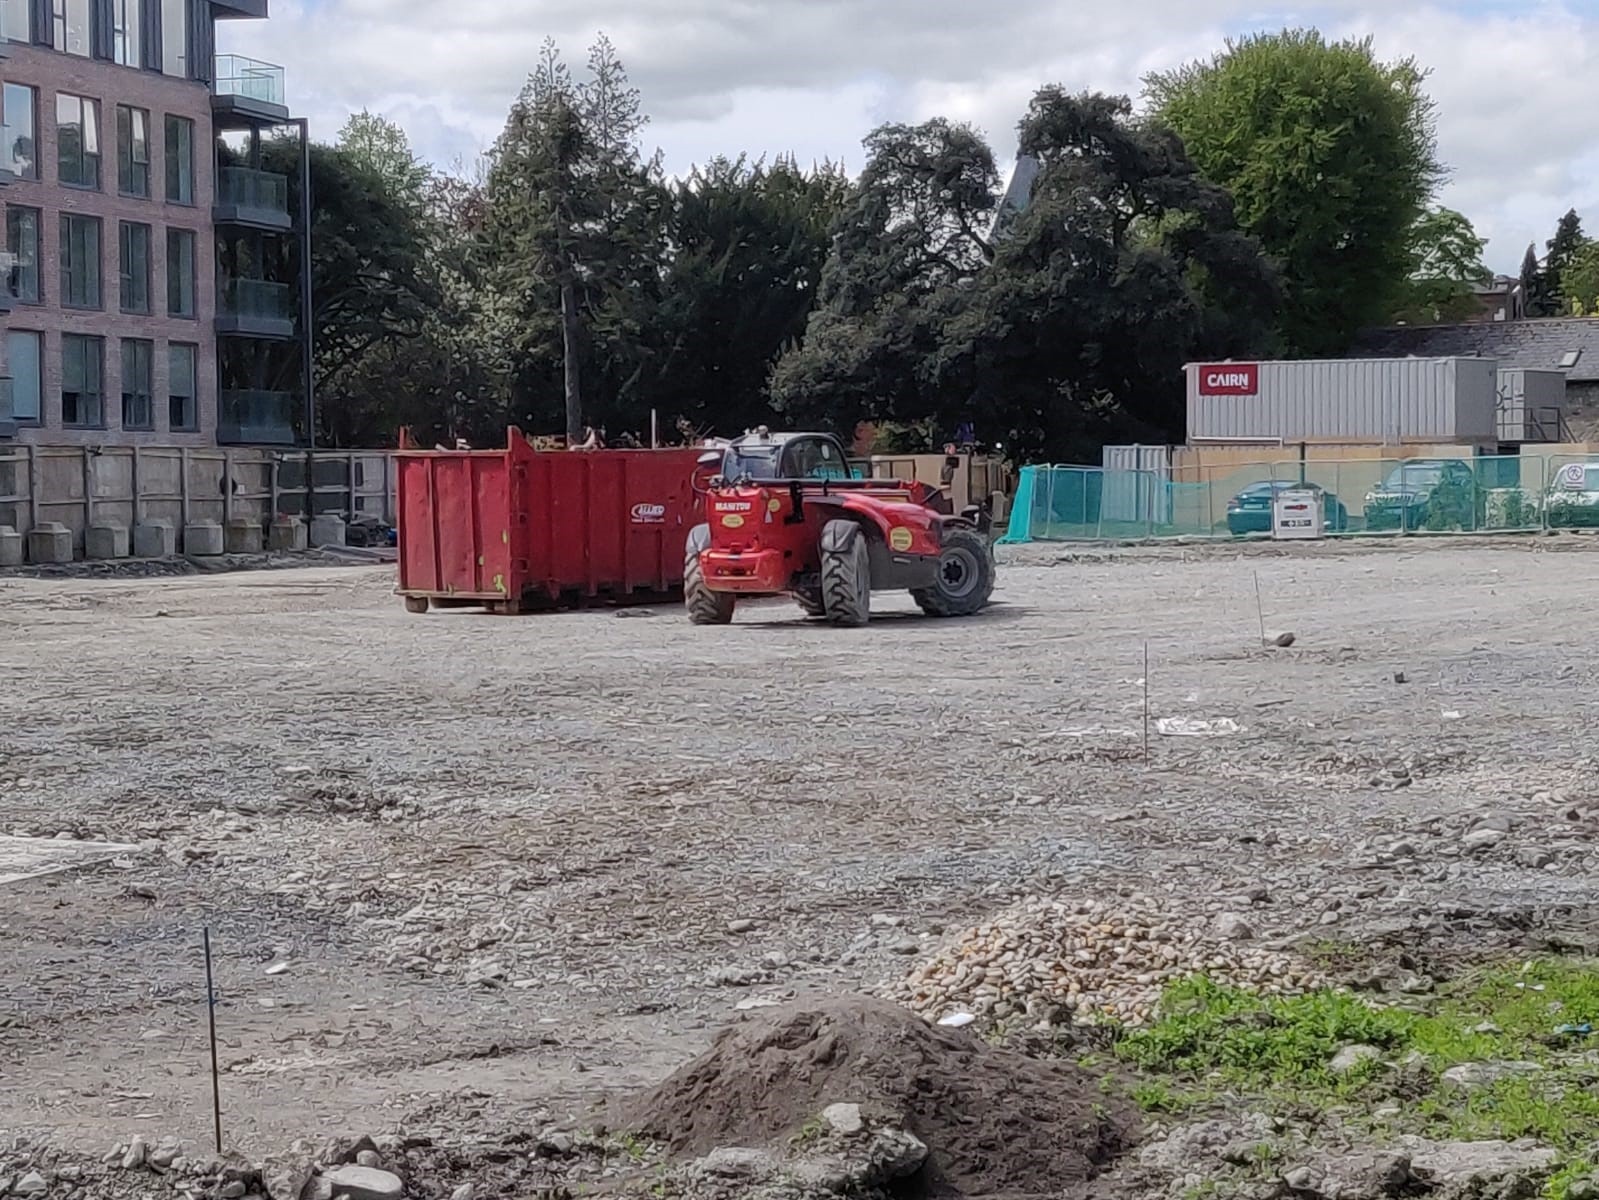 Cairn PLC Rathgar Completed